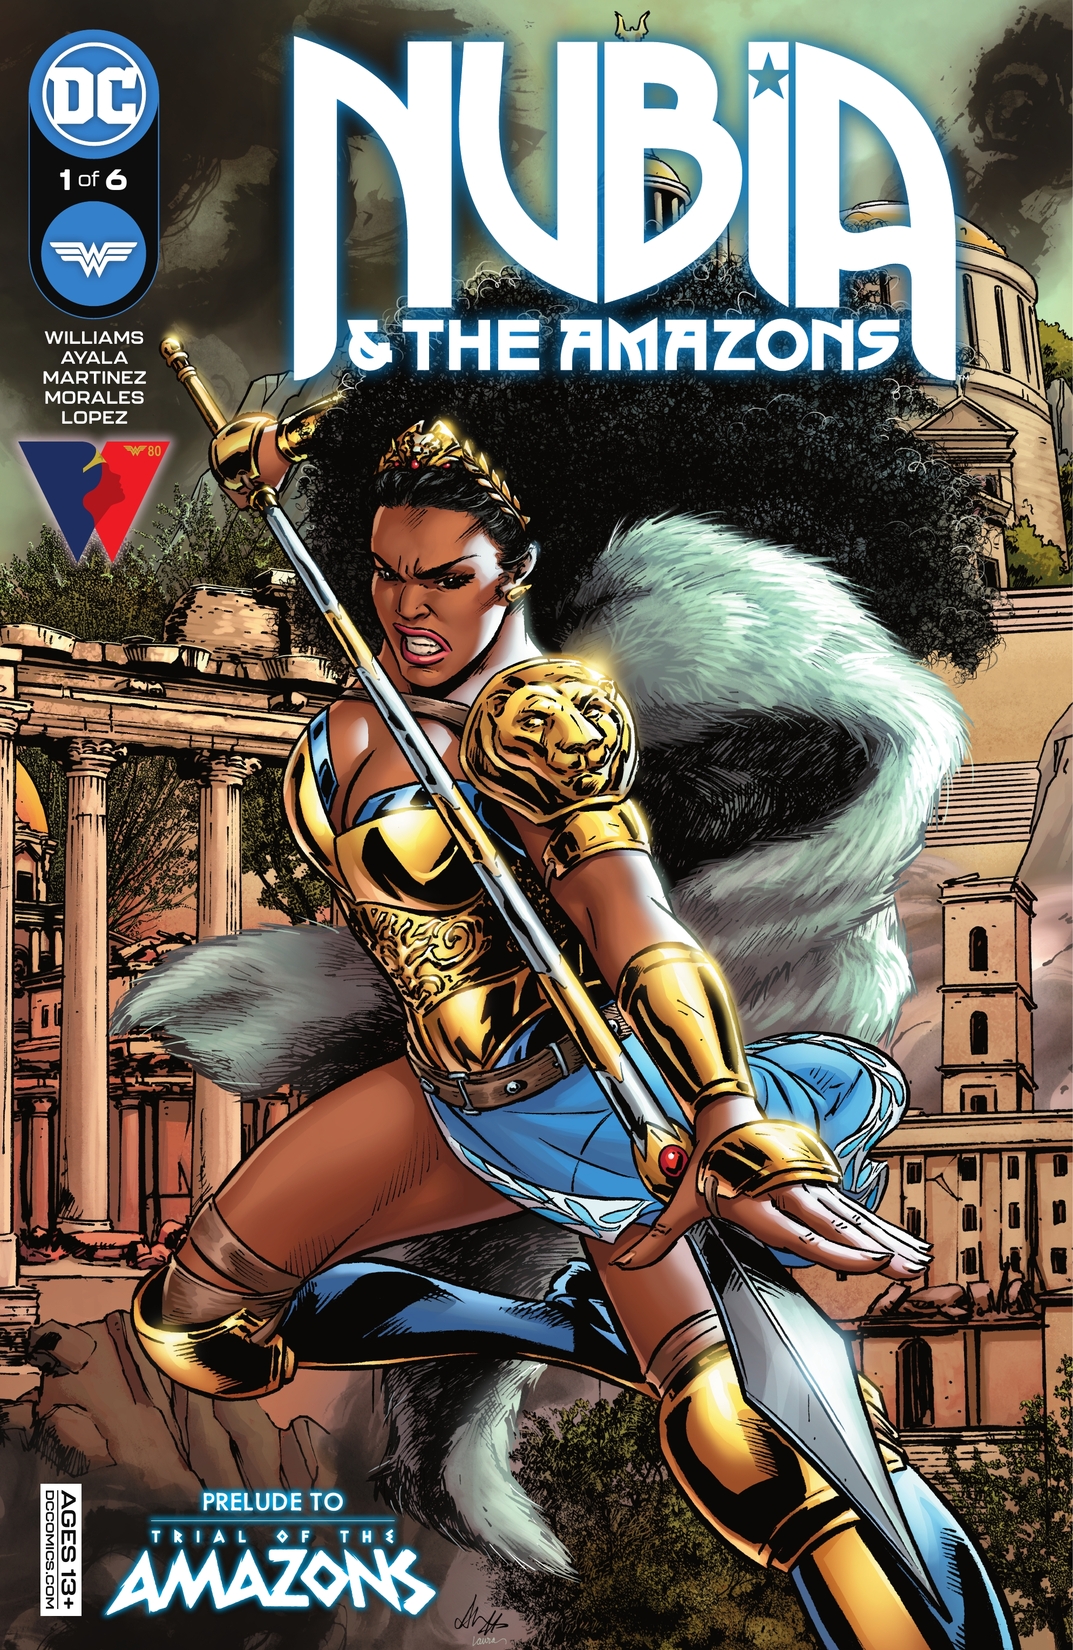 Nubia & the Amazons #1 preview images